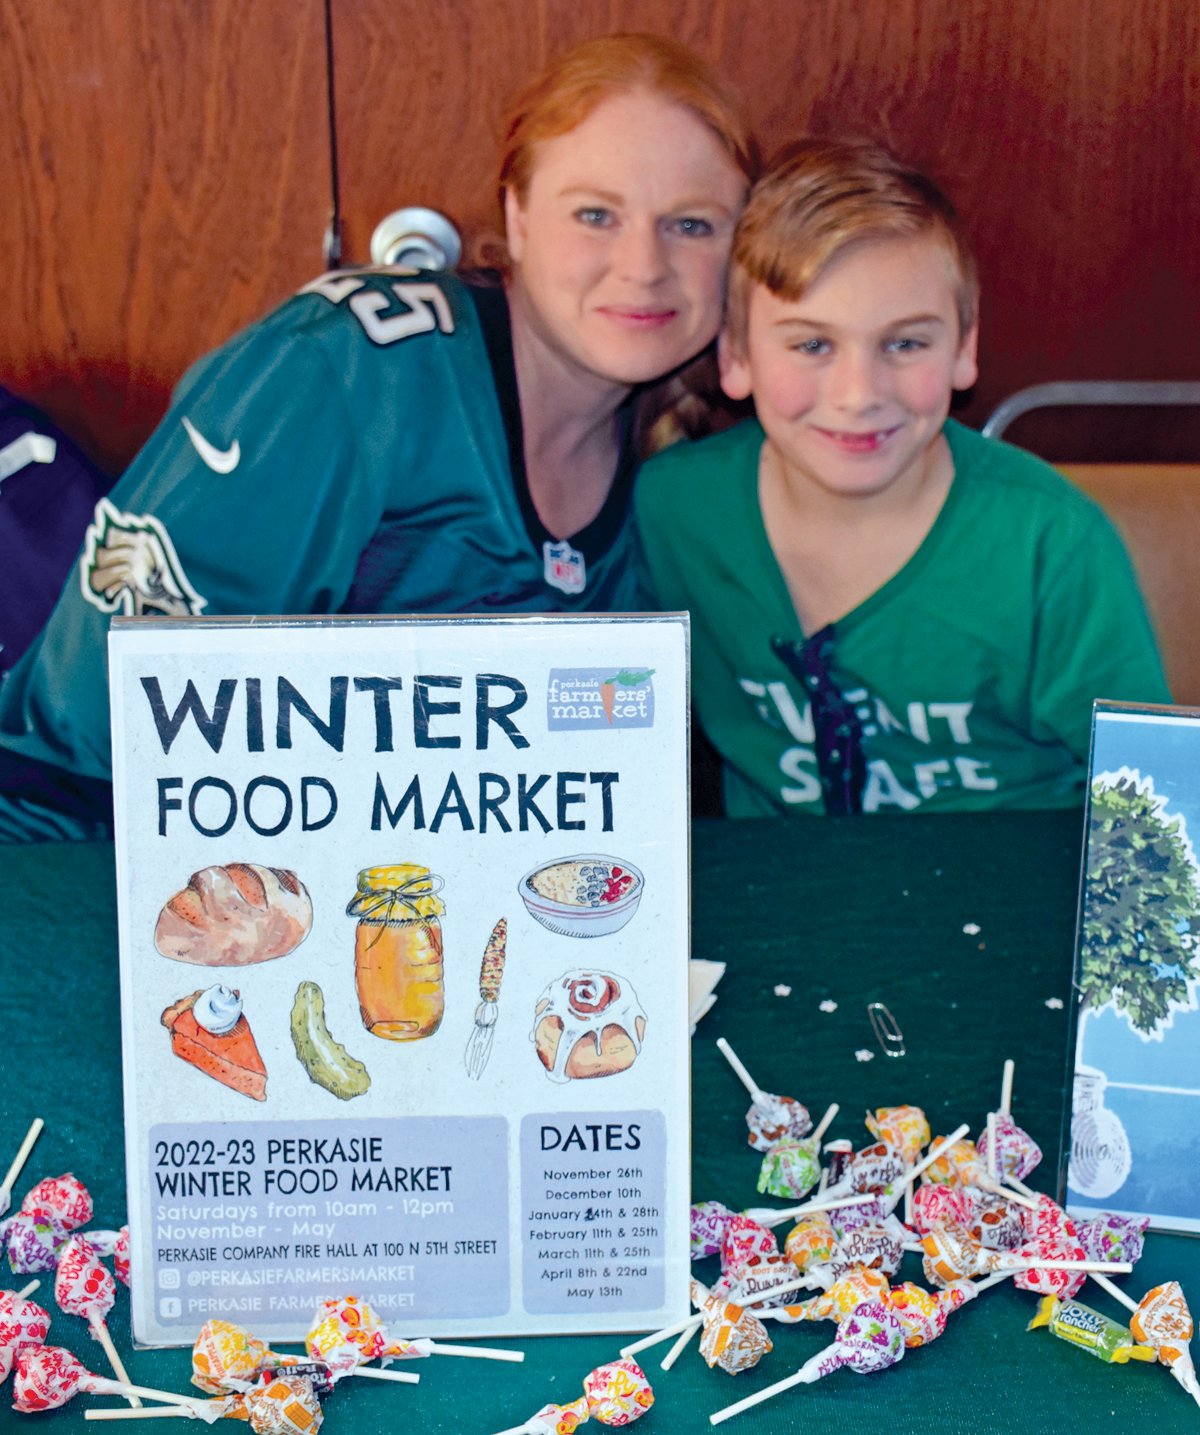 Jessica Tantorno, Perkasie borough assistant, and her son, Kaleb, host the Perkasie Winter Food Market at Perkasie Firehouse during the 'Winter Wanderland' celebration in downtown Perkasie on Jan. 28.